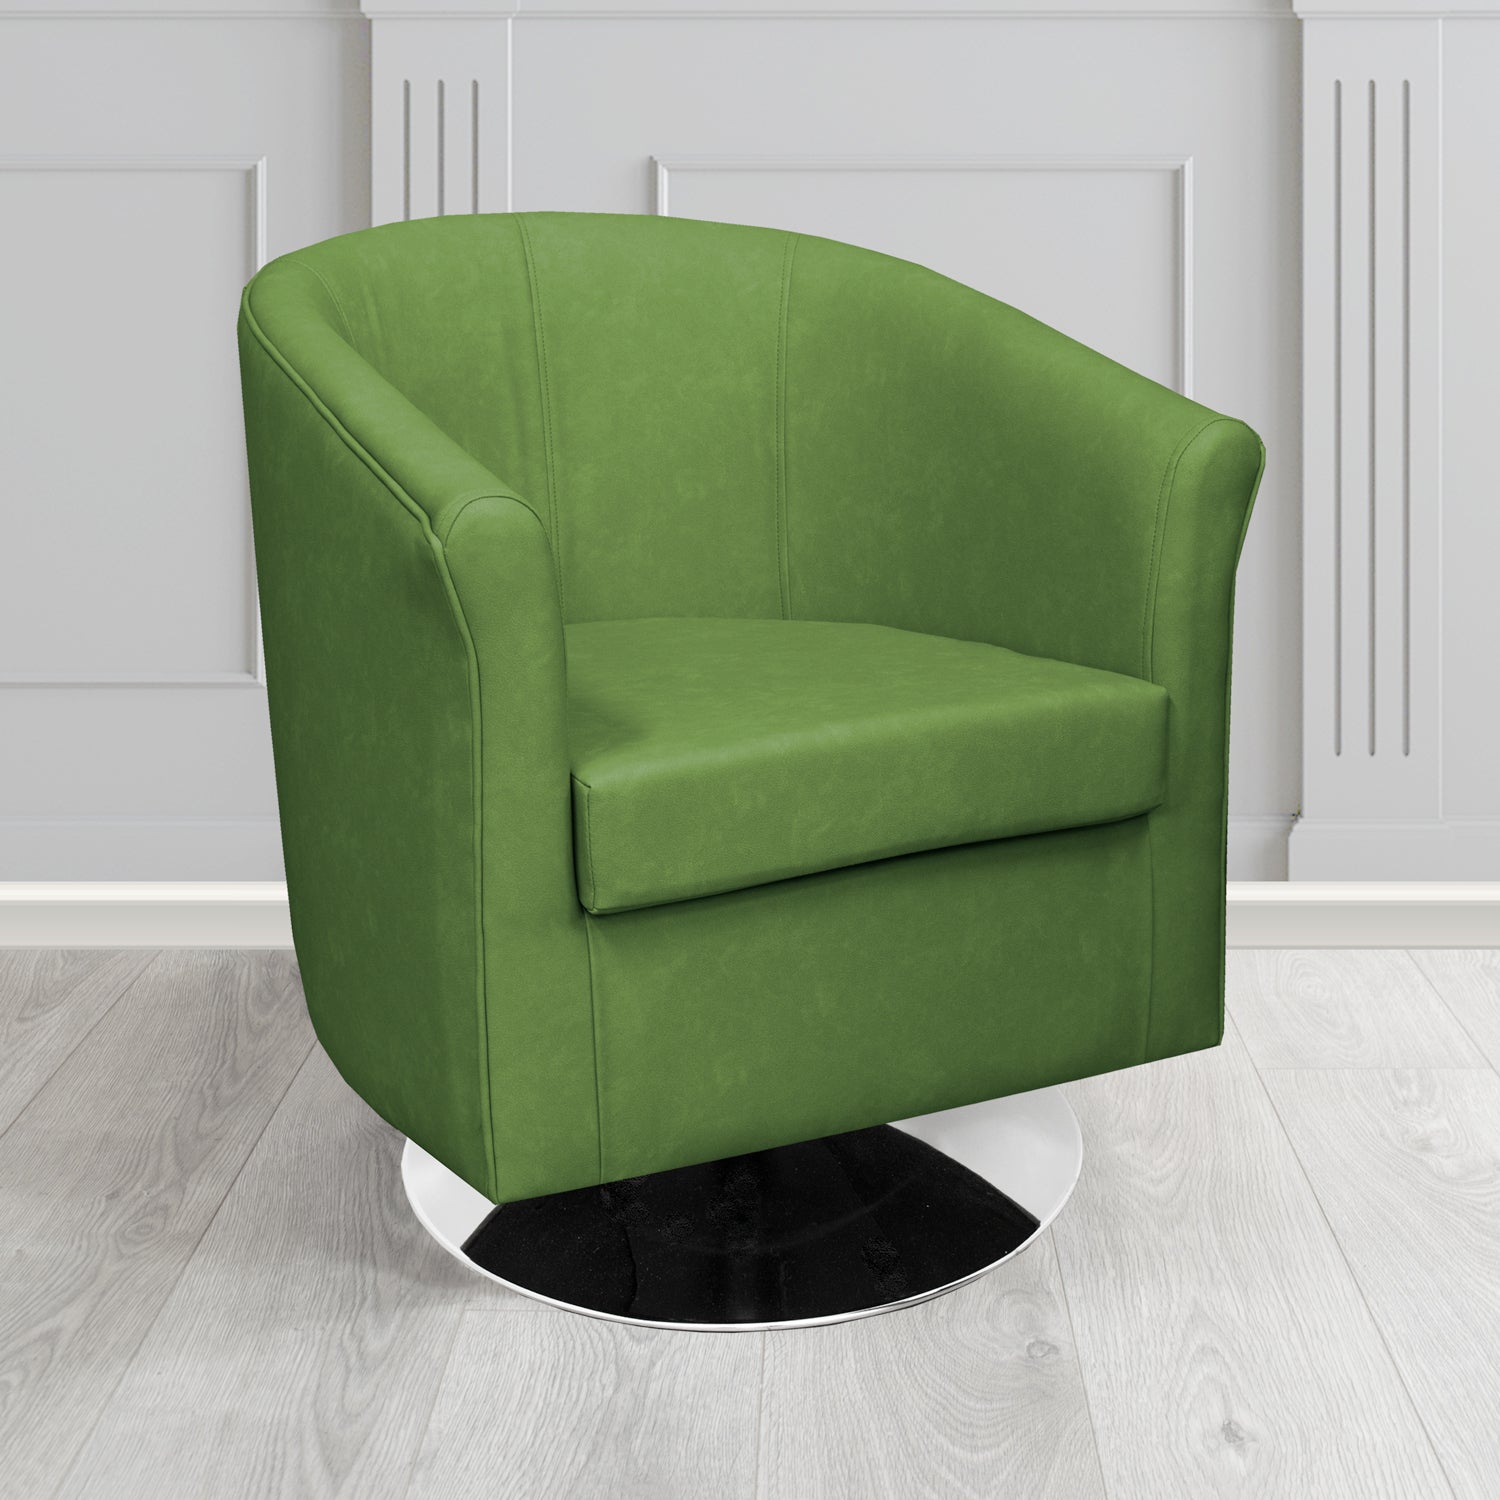 Tuscany Swivel Tub Chair in Infiniti Leaf INF999 Antimicrobial Crib 5 Faux Leather - The Tub Chair Shop